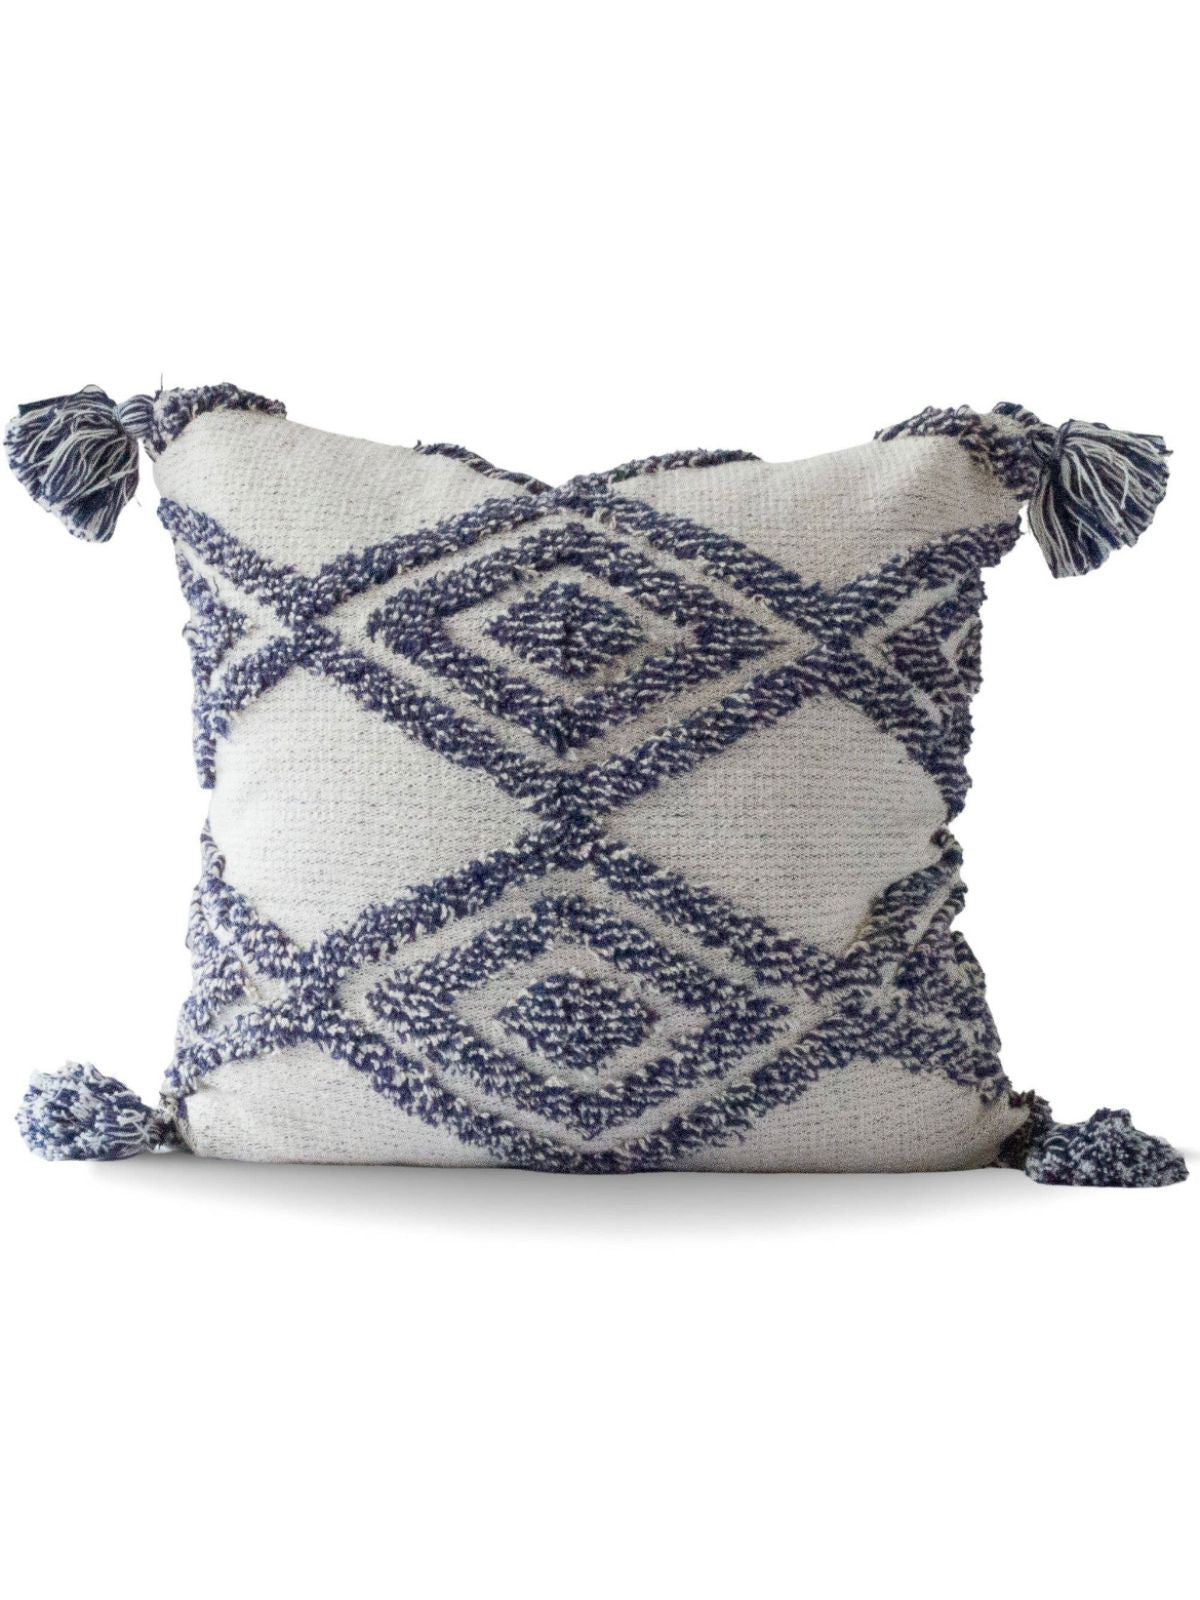 The 20x20 Kimora Diamond Tufted Pillow Cover has a cozy, plush texture, and diamond tufted design The Kimora Pillow Cover is perfect for any space. Sold by KYA Home Decor